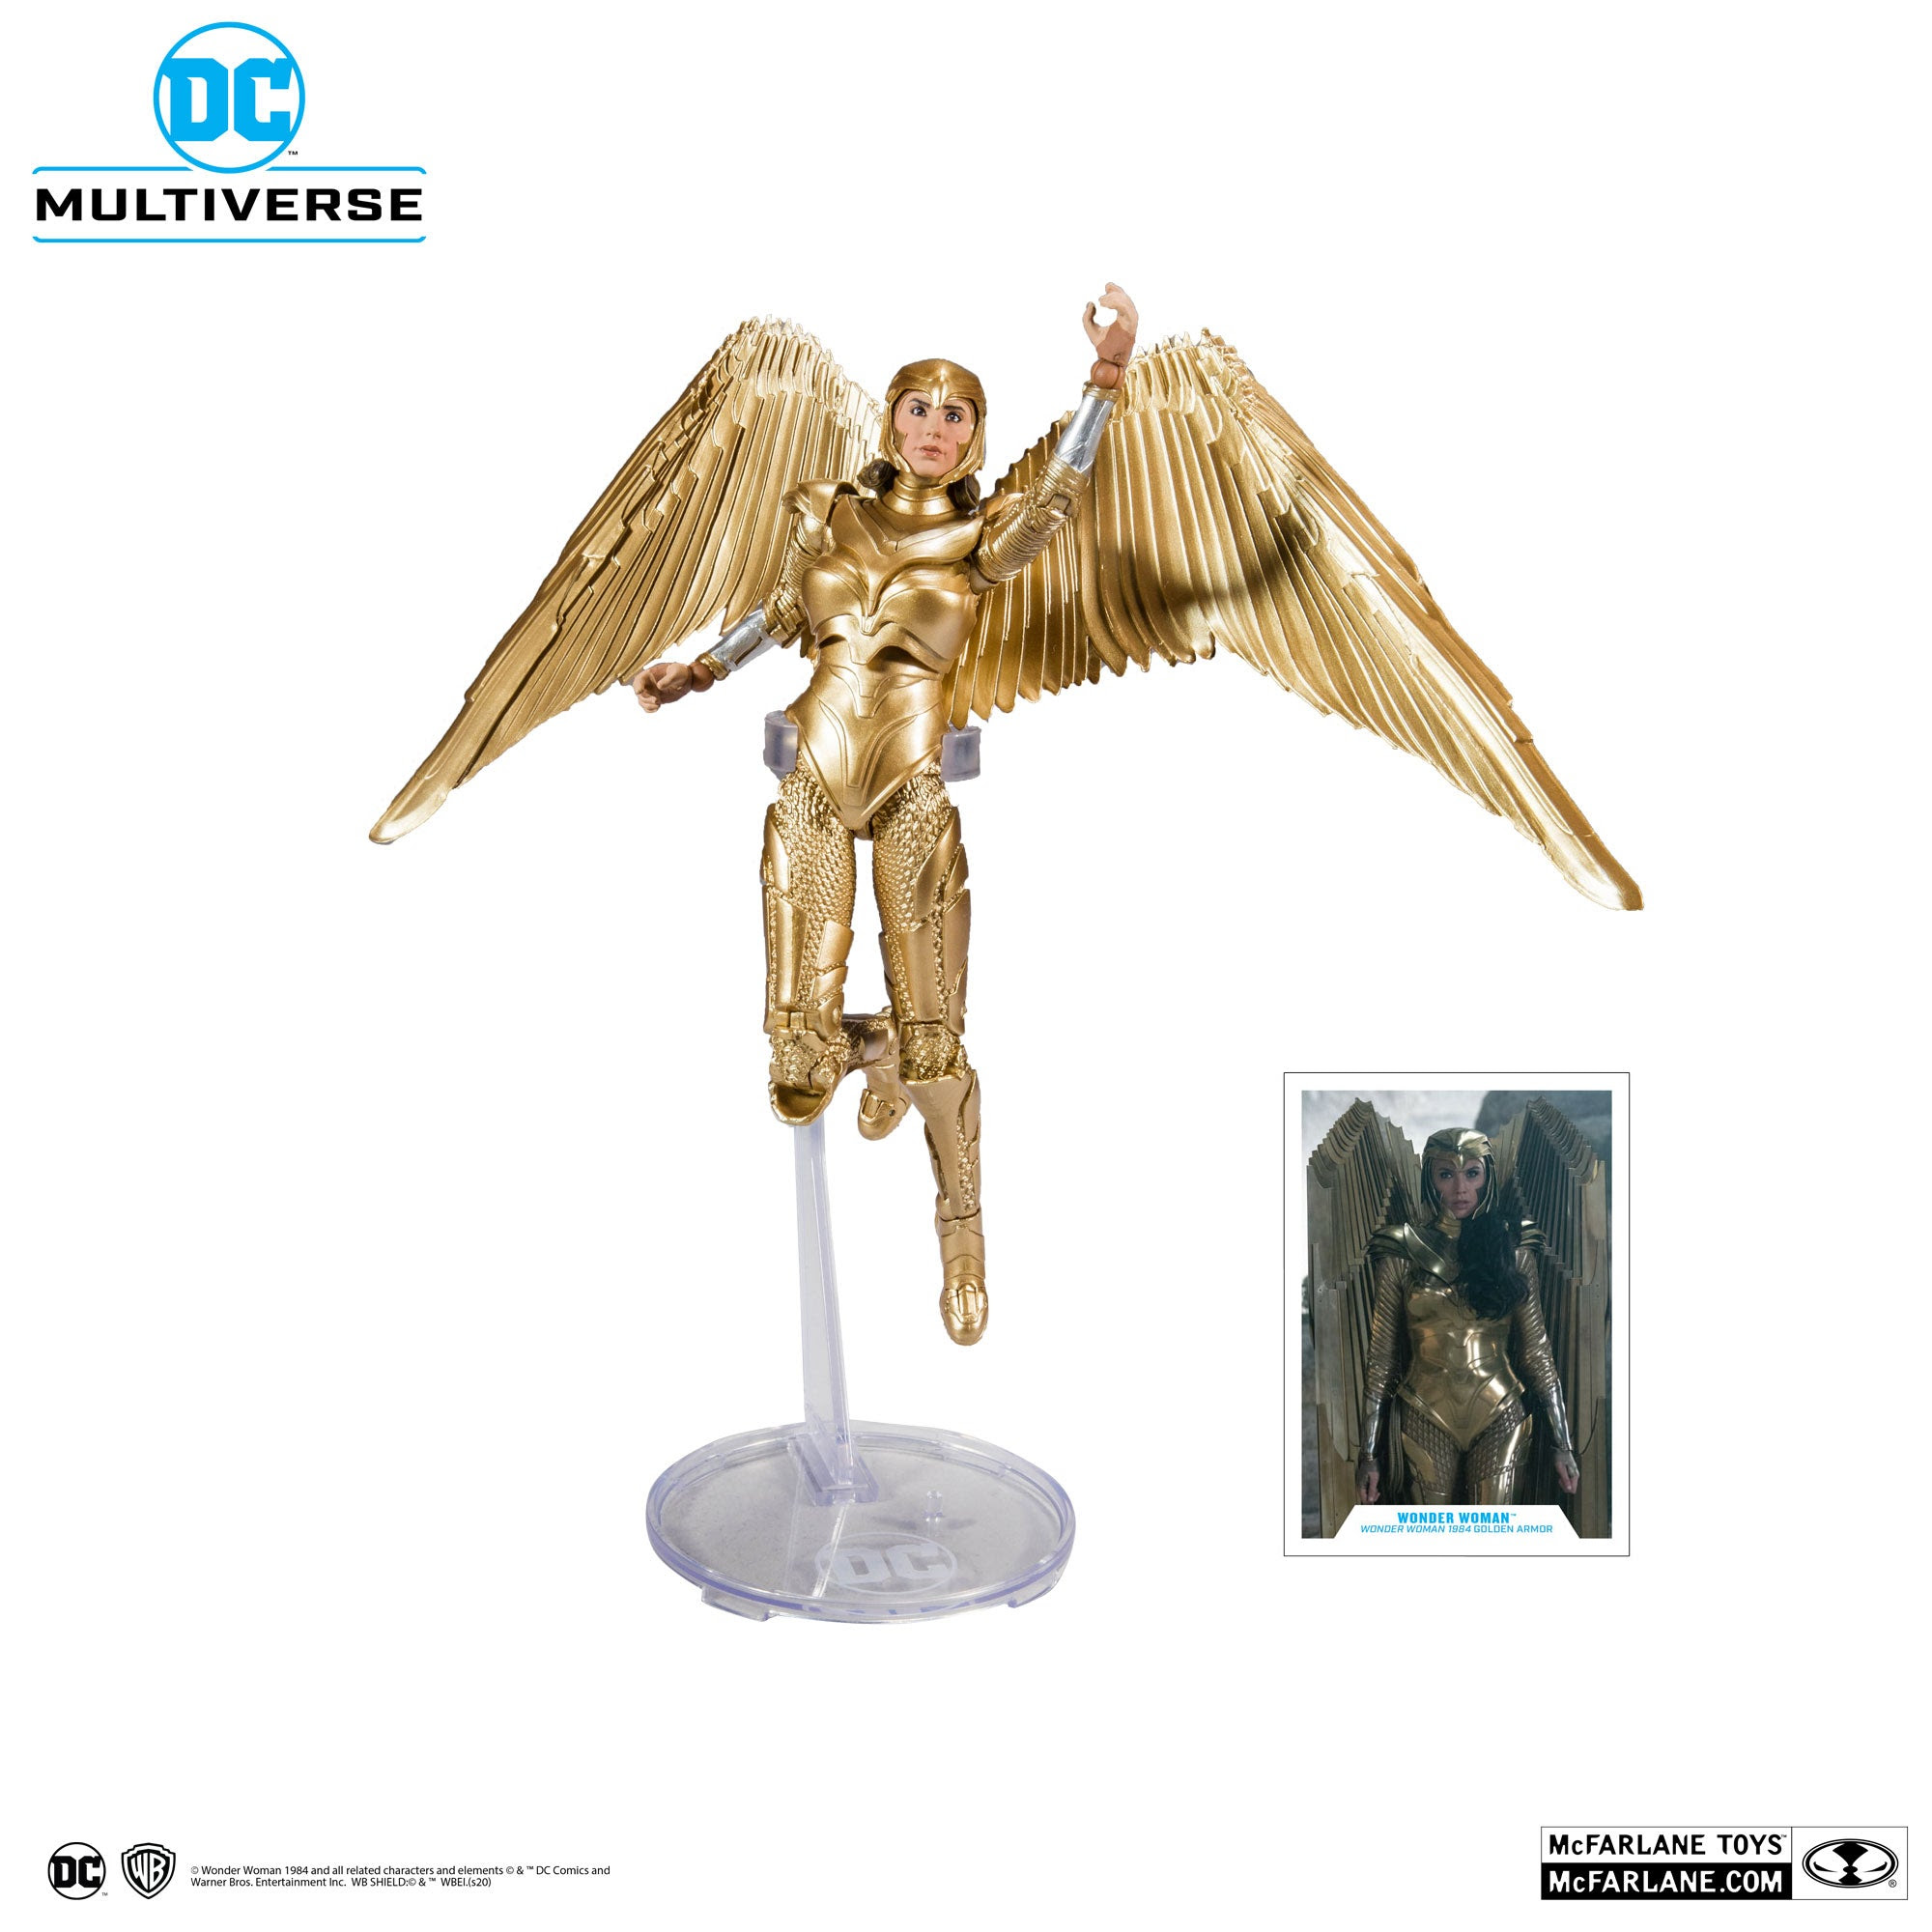 Image of DC Multiverse Wonder Woman 1984 7" Scale Action Figures - Wonder Woman (Gold Armor)